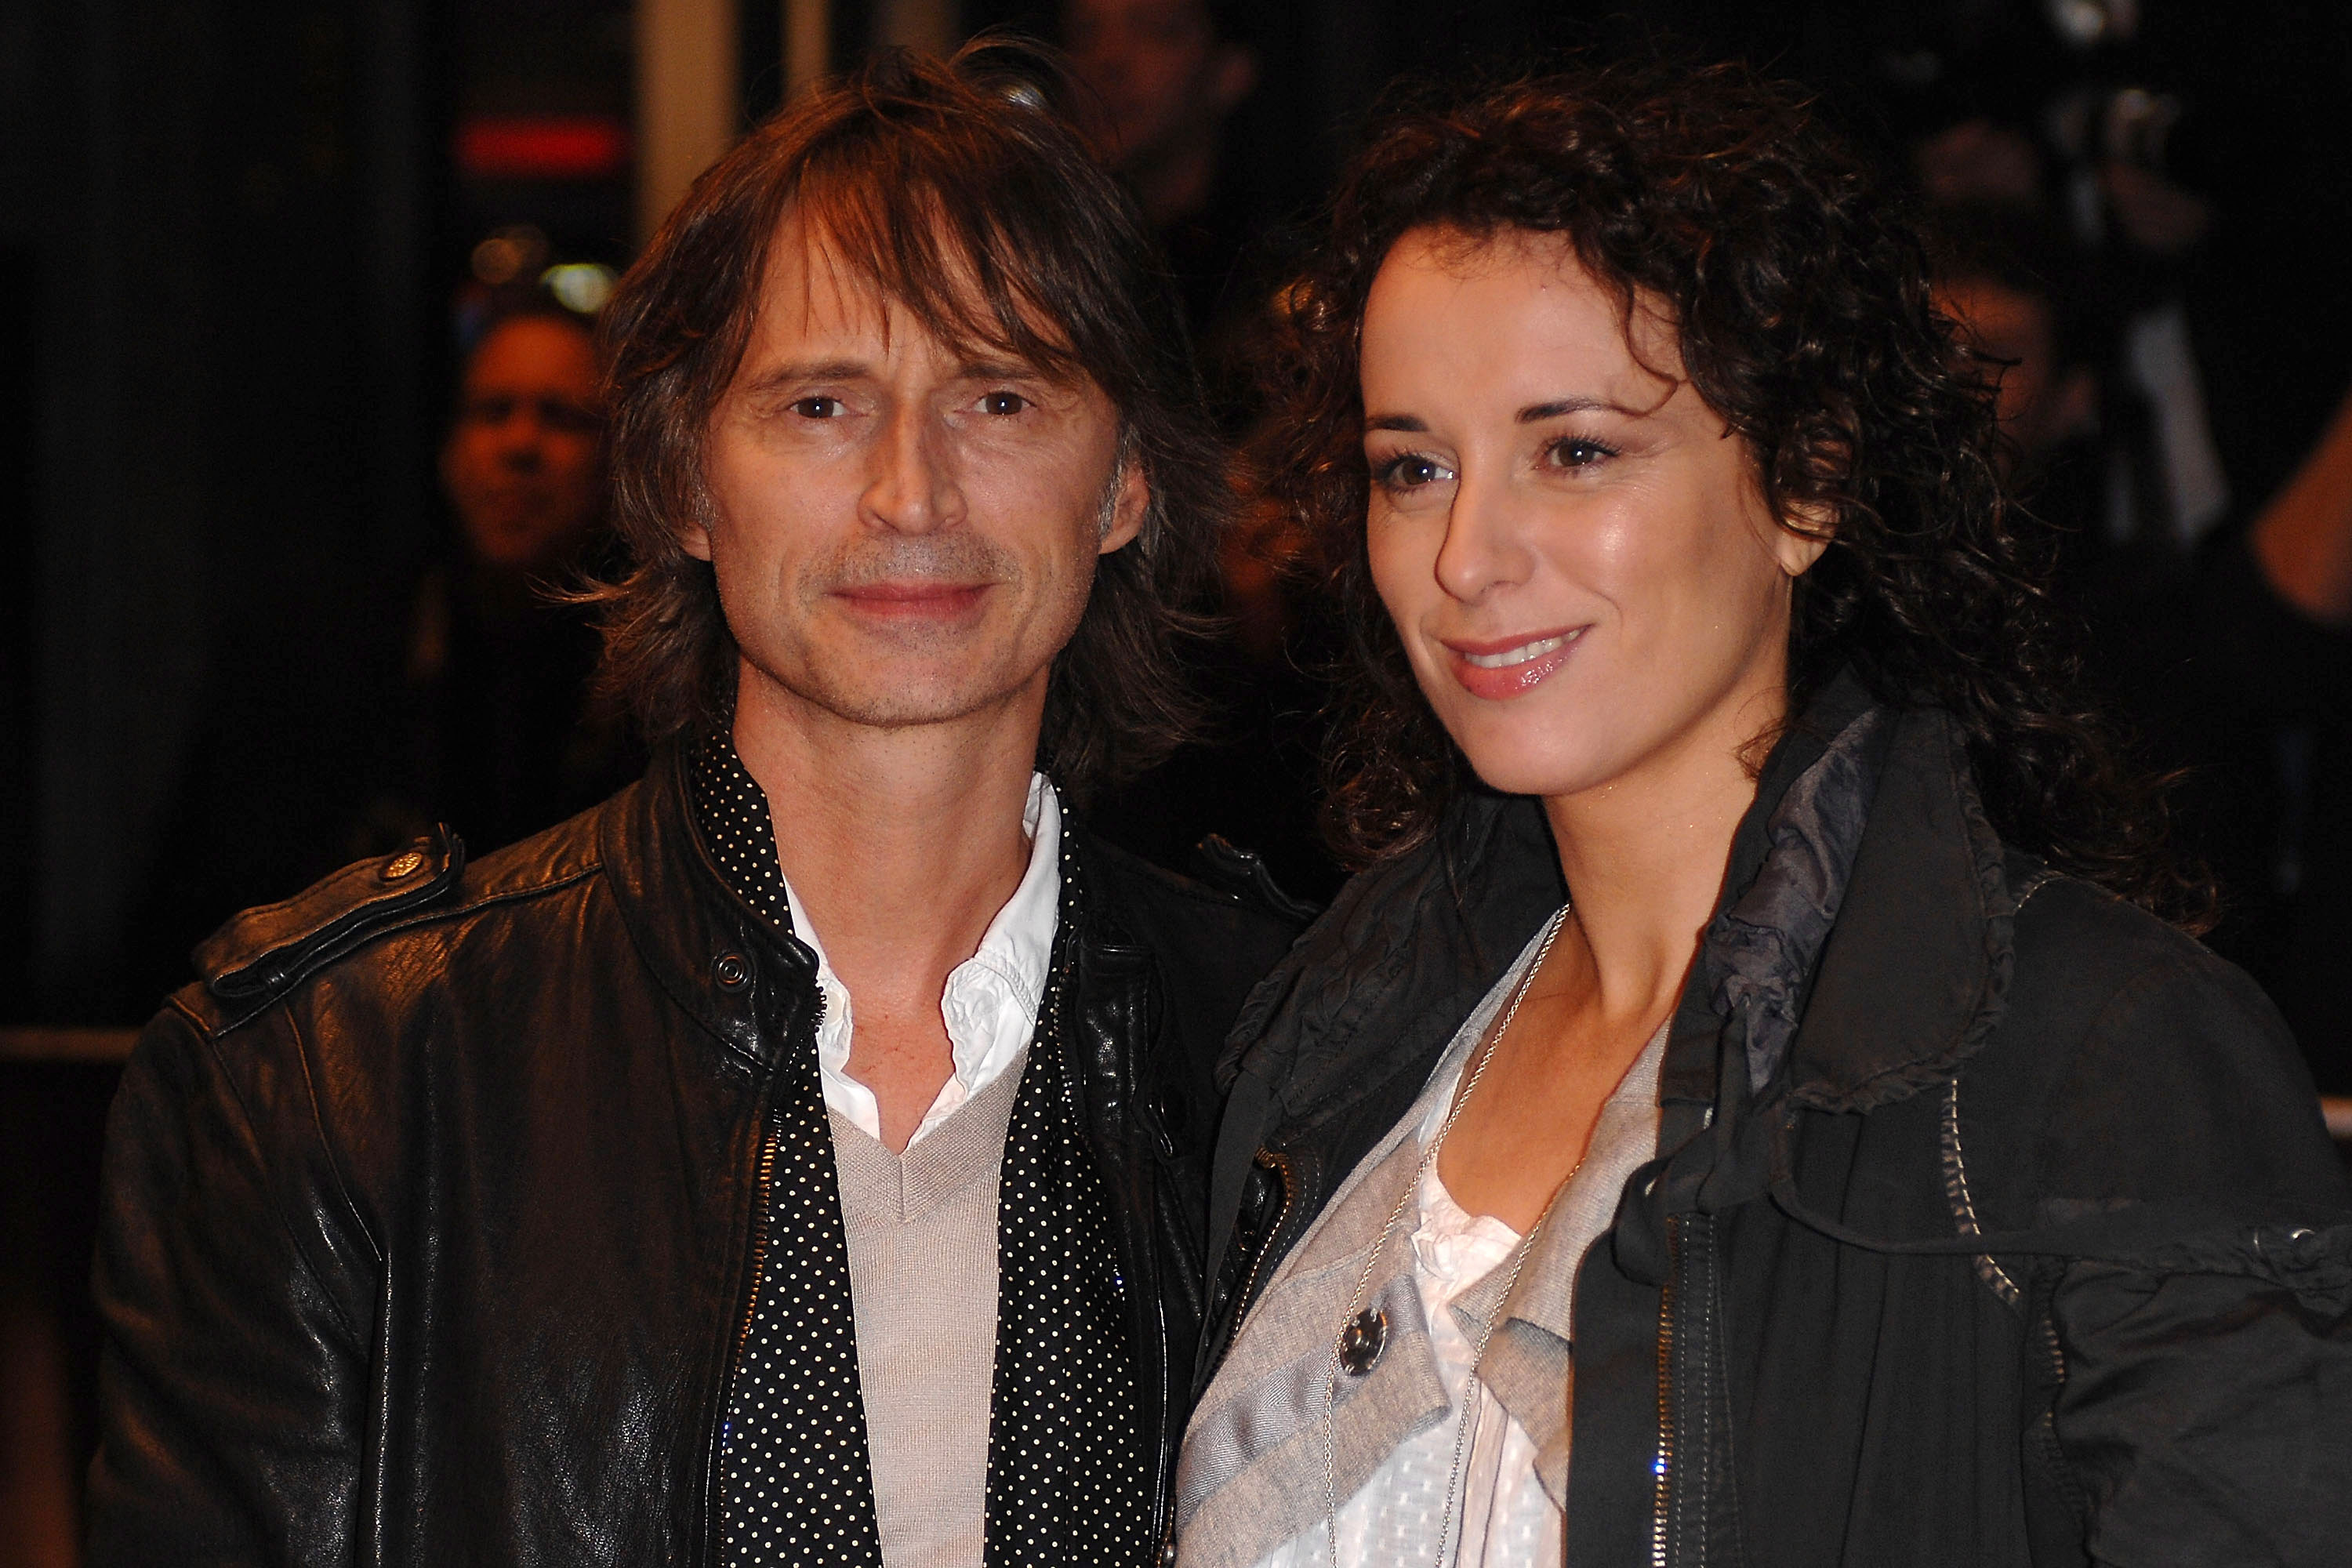 Robert Carlyle and Anastasia Shirley at the screening of "I Know You Know" during the BFI 52nd London Film Festival on October 25, 2008, in London, England. | Source: Getty Images